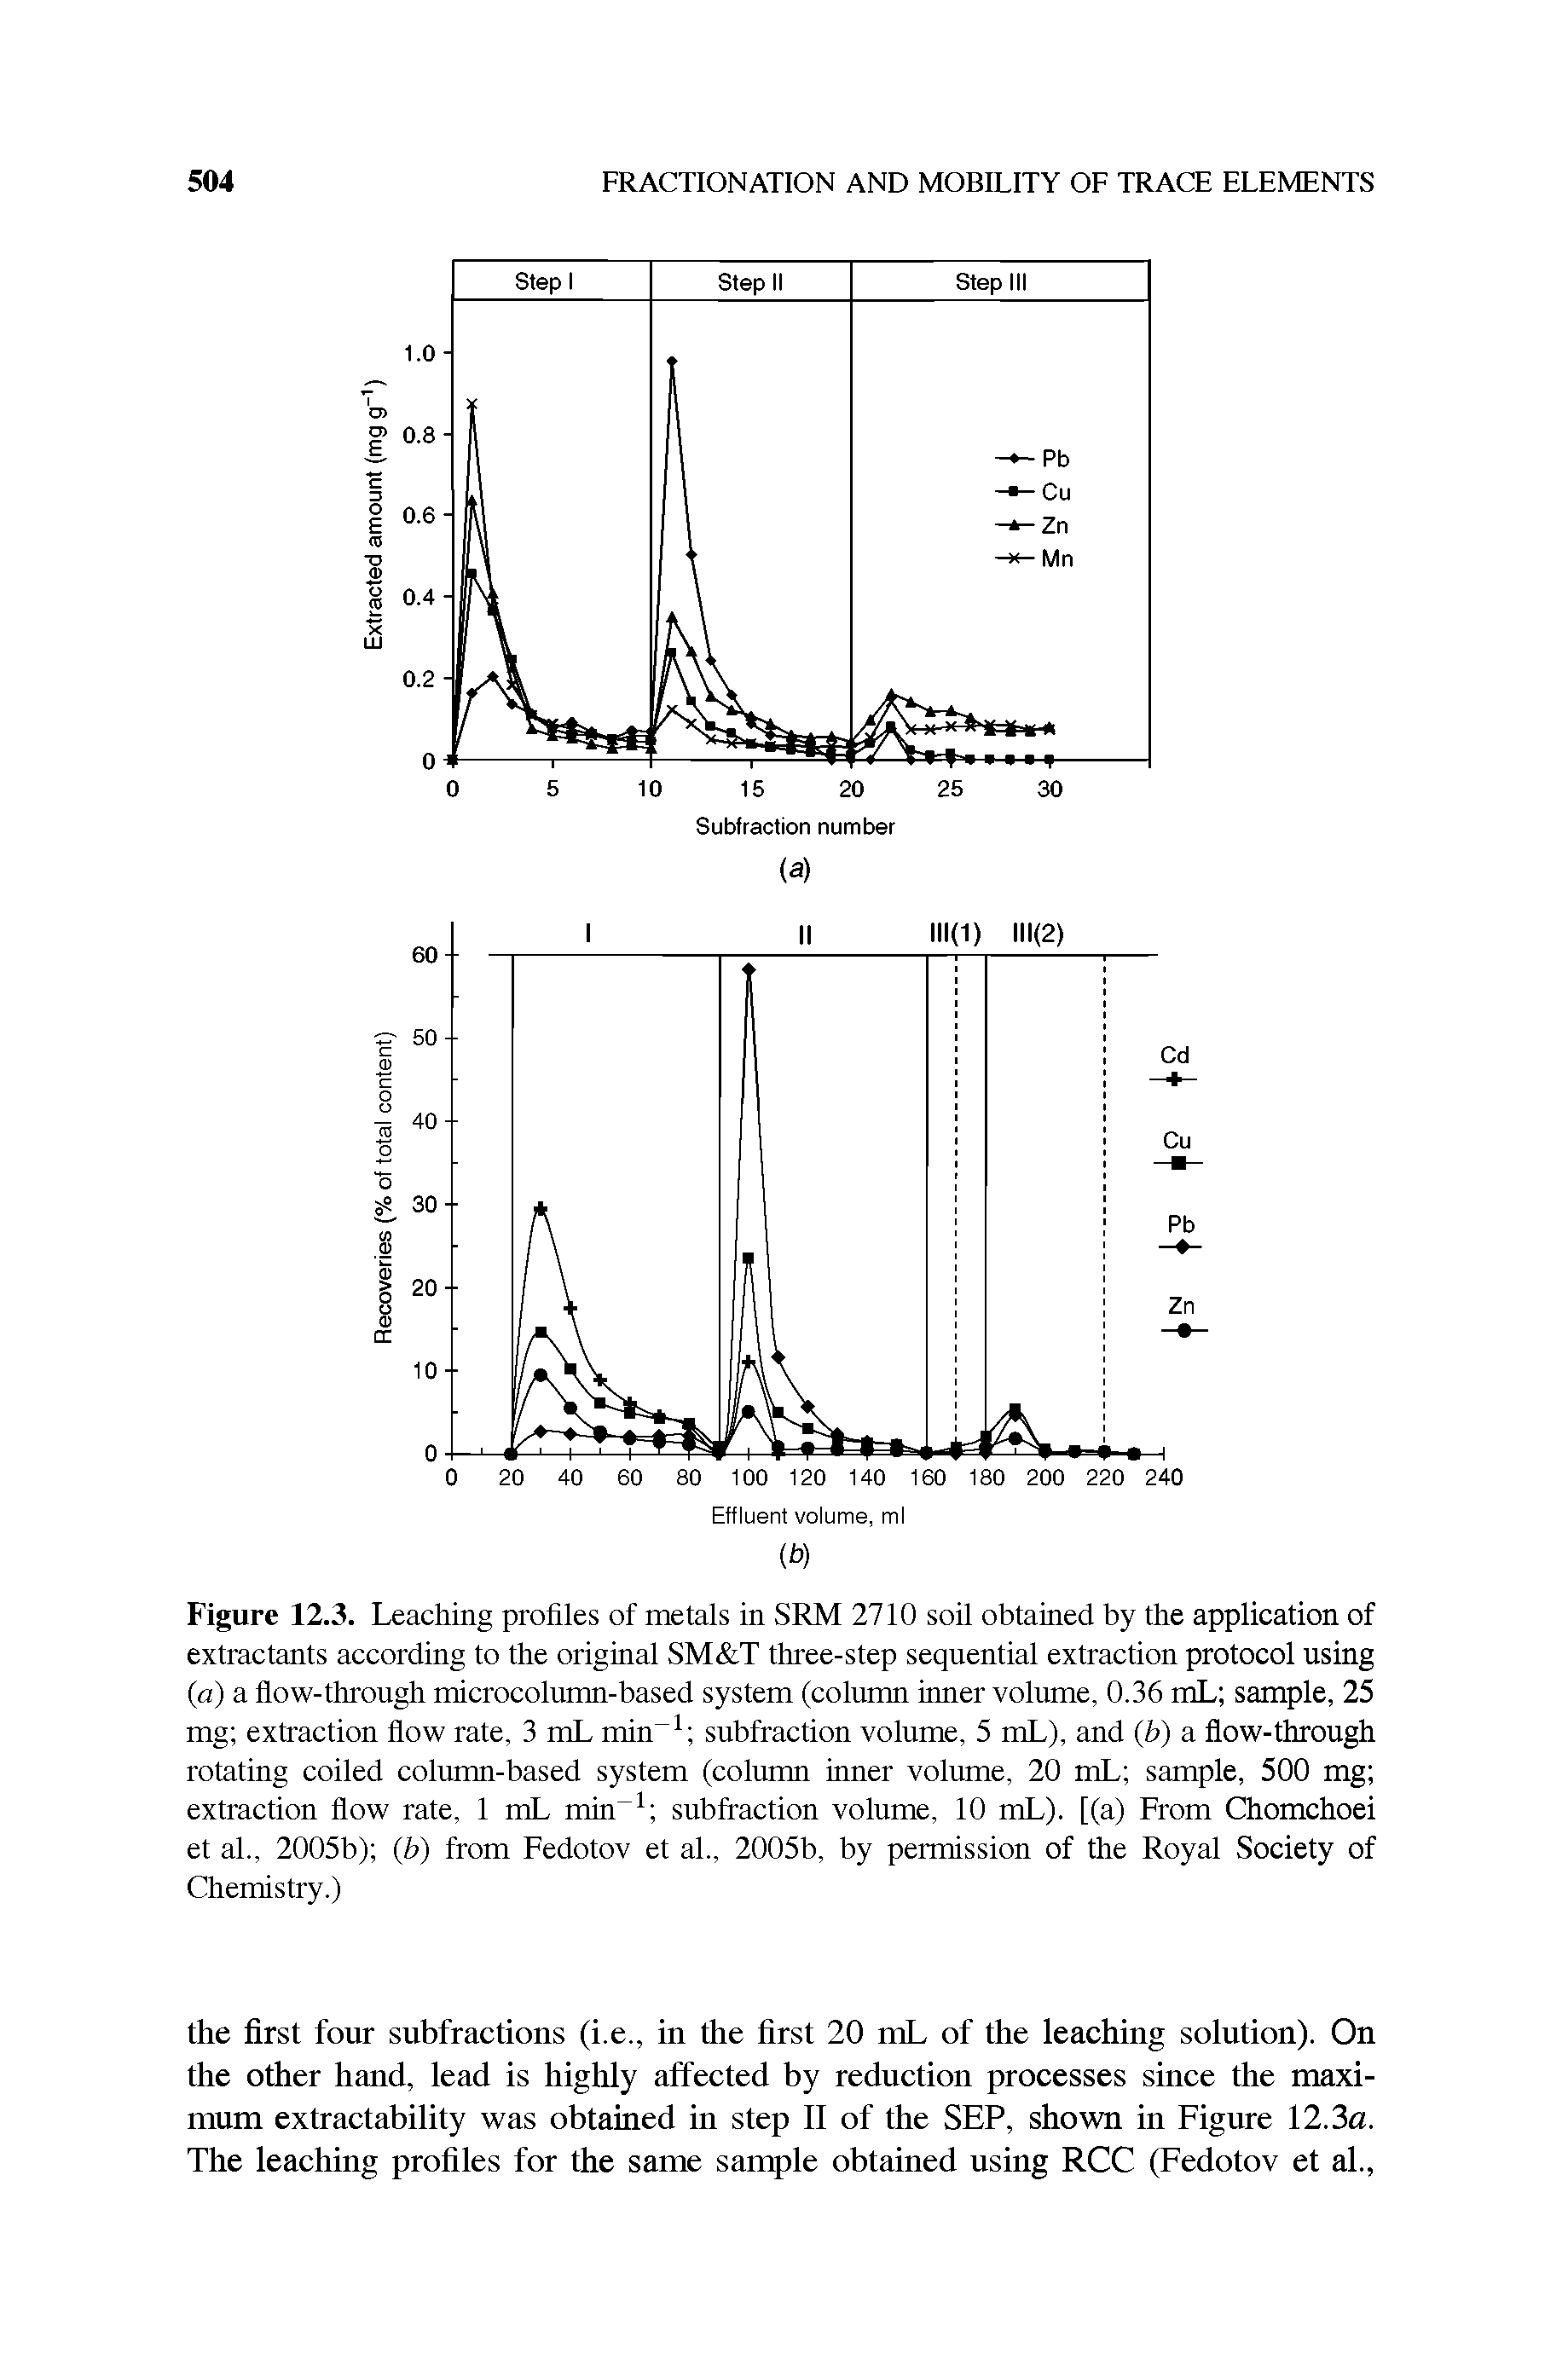 Figure 12.3. Leaching profiles of metals in SRM 2710 soil obtained by the application of extractants according to the original SM T three-step sequential extraction protocol using (a) a flow-through microcolumn-based system (column inner volume, 0.36 mL sample, 25 mg extraction flow rate, 3 mL min subfraction volume, 5 mL), and (b) a flow-through rotating coiled column-based system (column inner volume, 20 mL sample, 500 mg extraction flow rate, 1 mL min subfraction volume, 10 mL). [(a) From Chomchoei et al., 2005b) (h) from Fedotov et al., 2005b, by permission of the Royal Society of Chemistry.)...